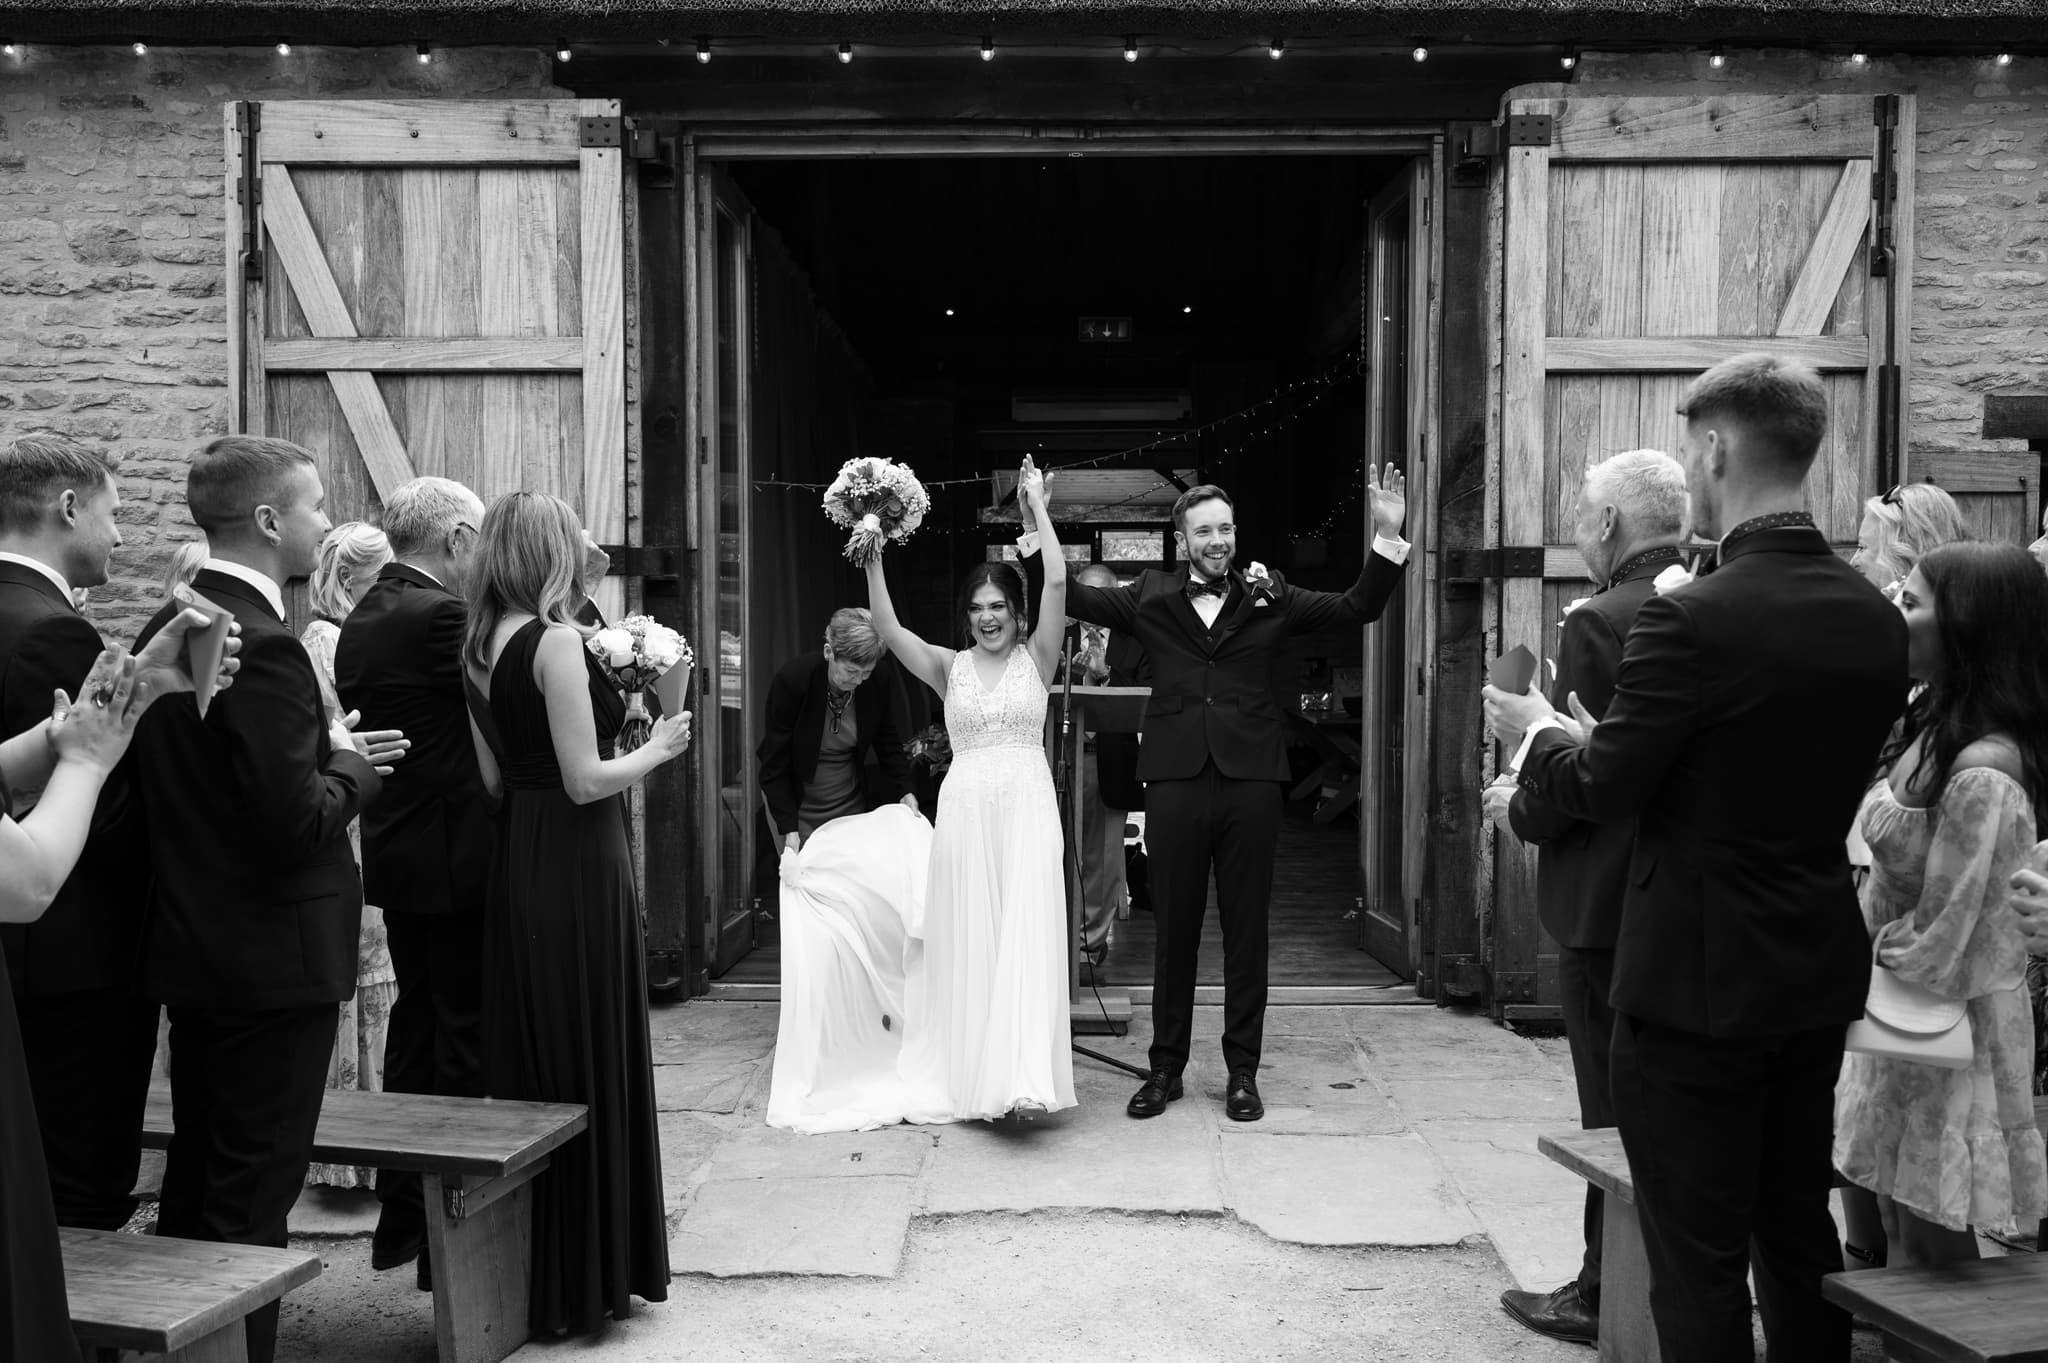 Bride and groom cheering before they walk down the aisle